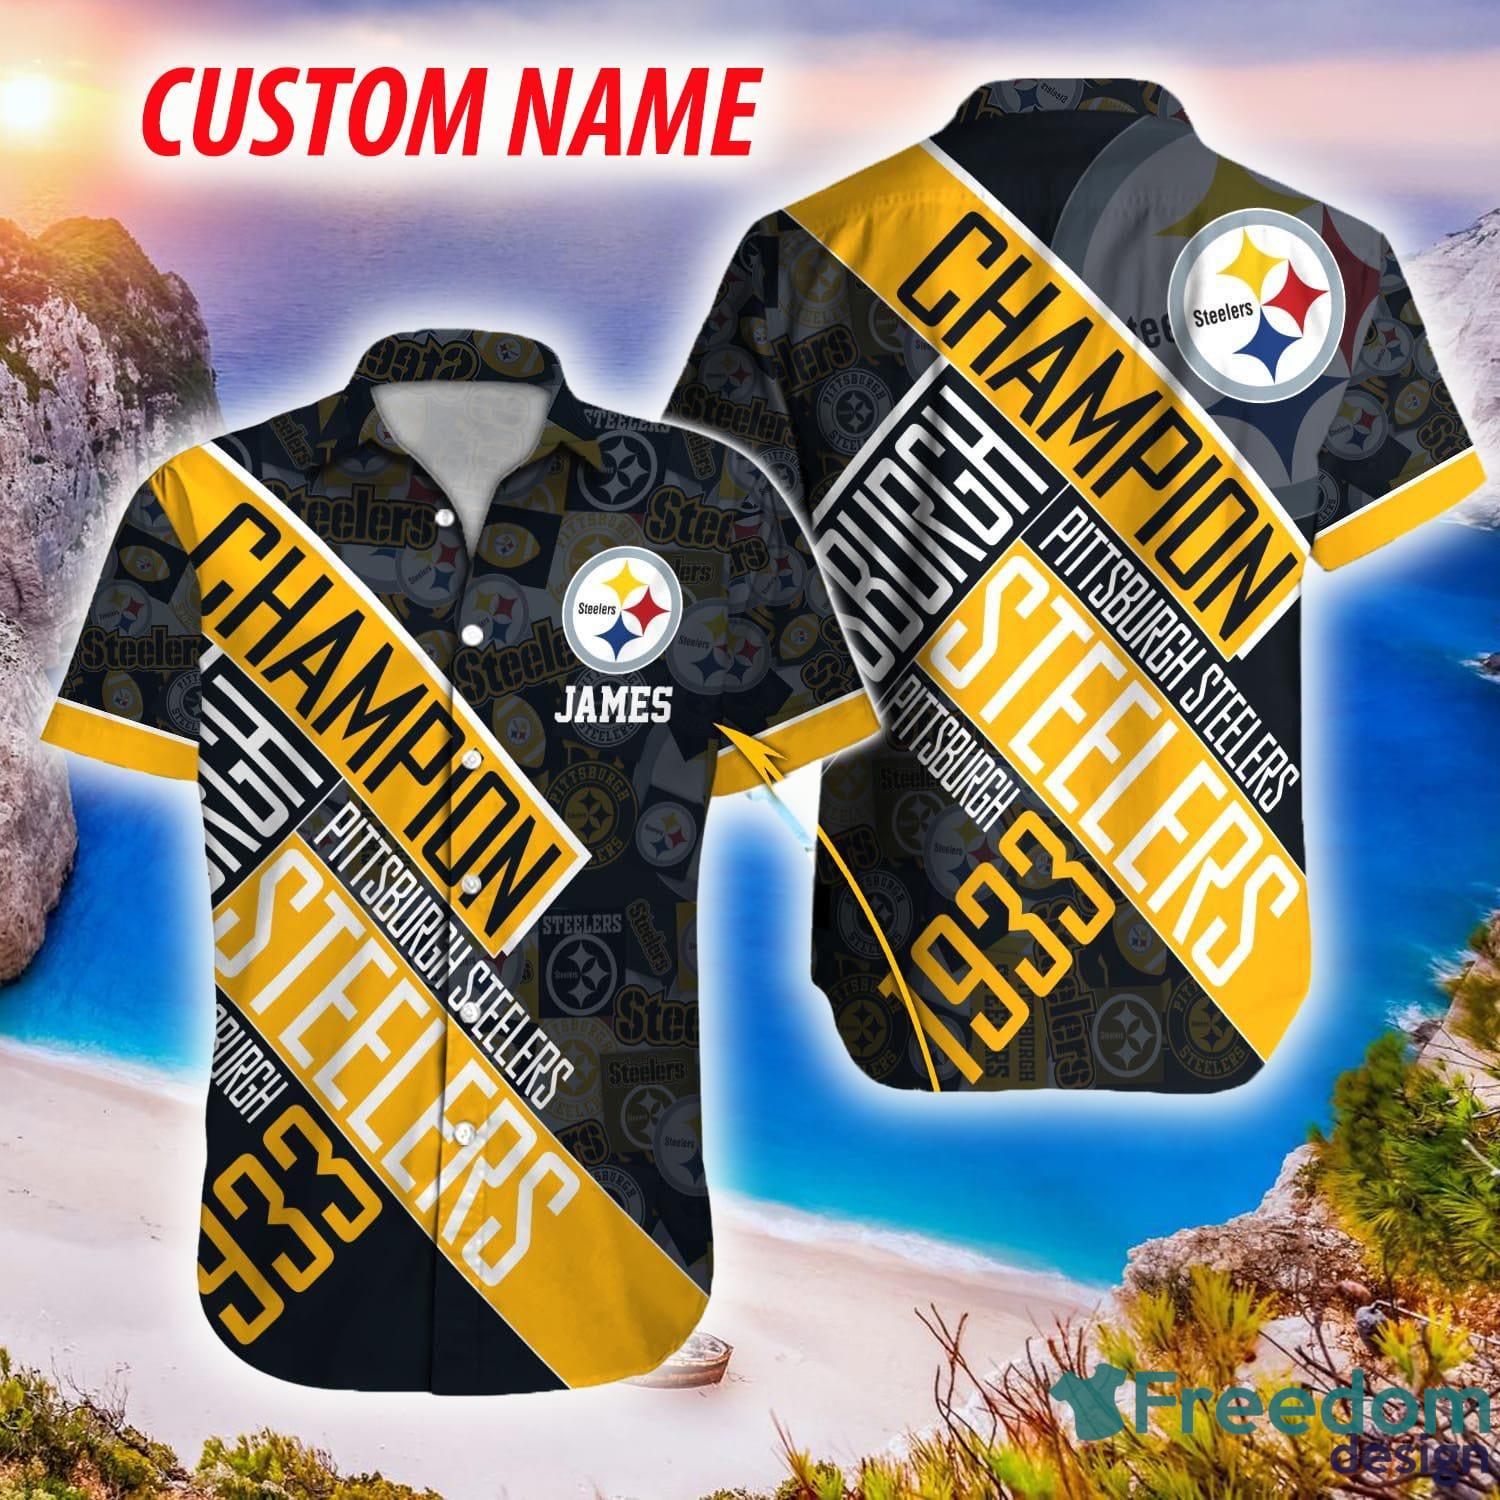 Customized & Personalized Pittsburgh Steelers NFL Fan Shop